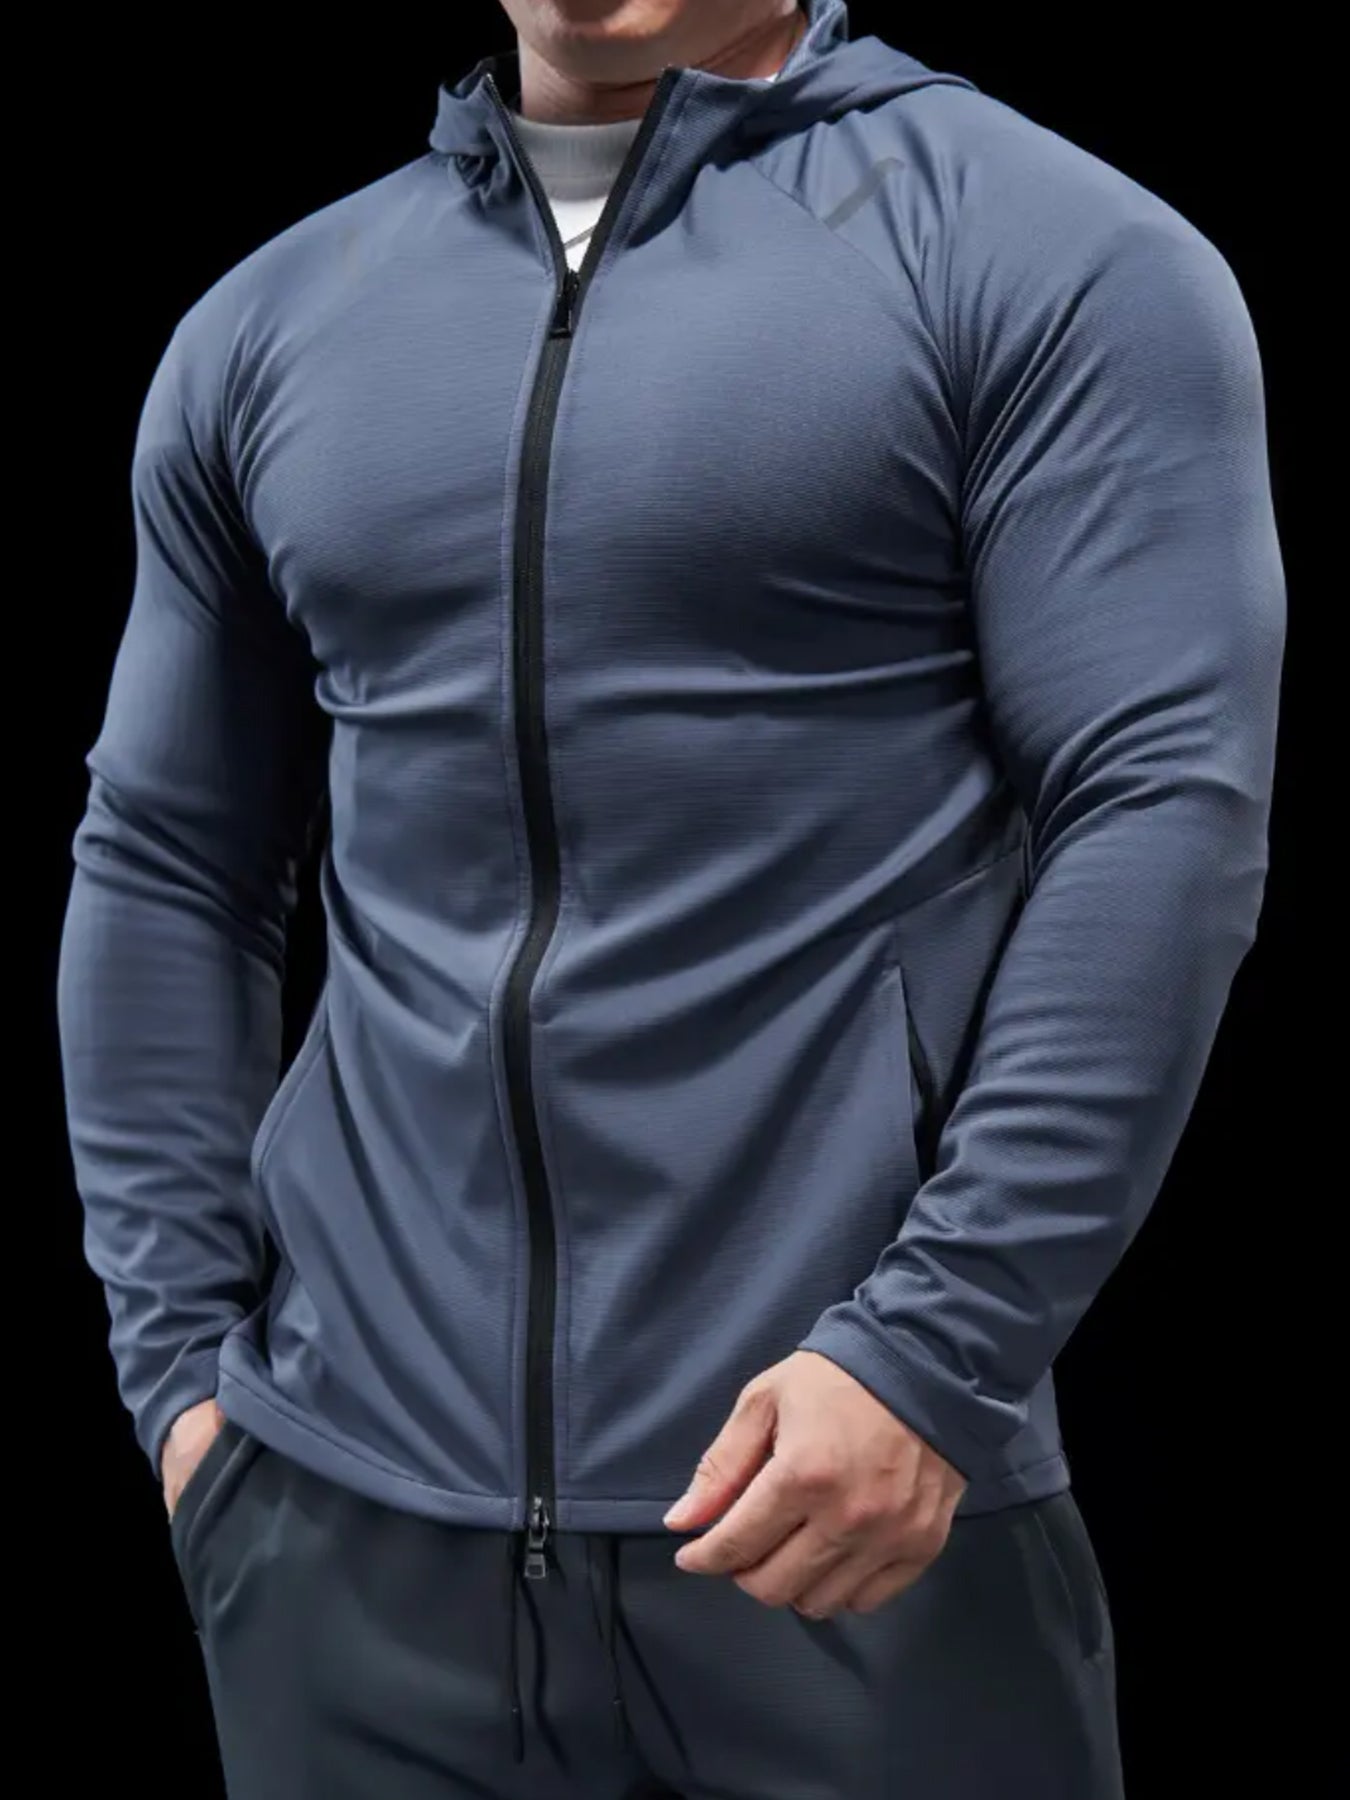 ElevateMotion Quick Dry Sports Fitness Hooded Jacket